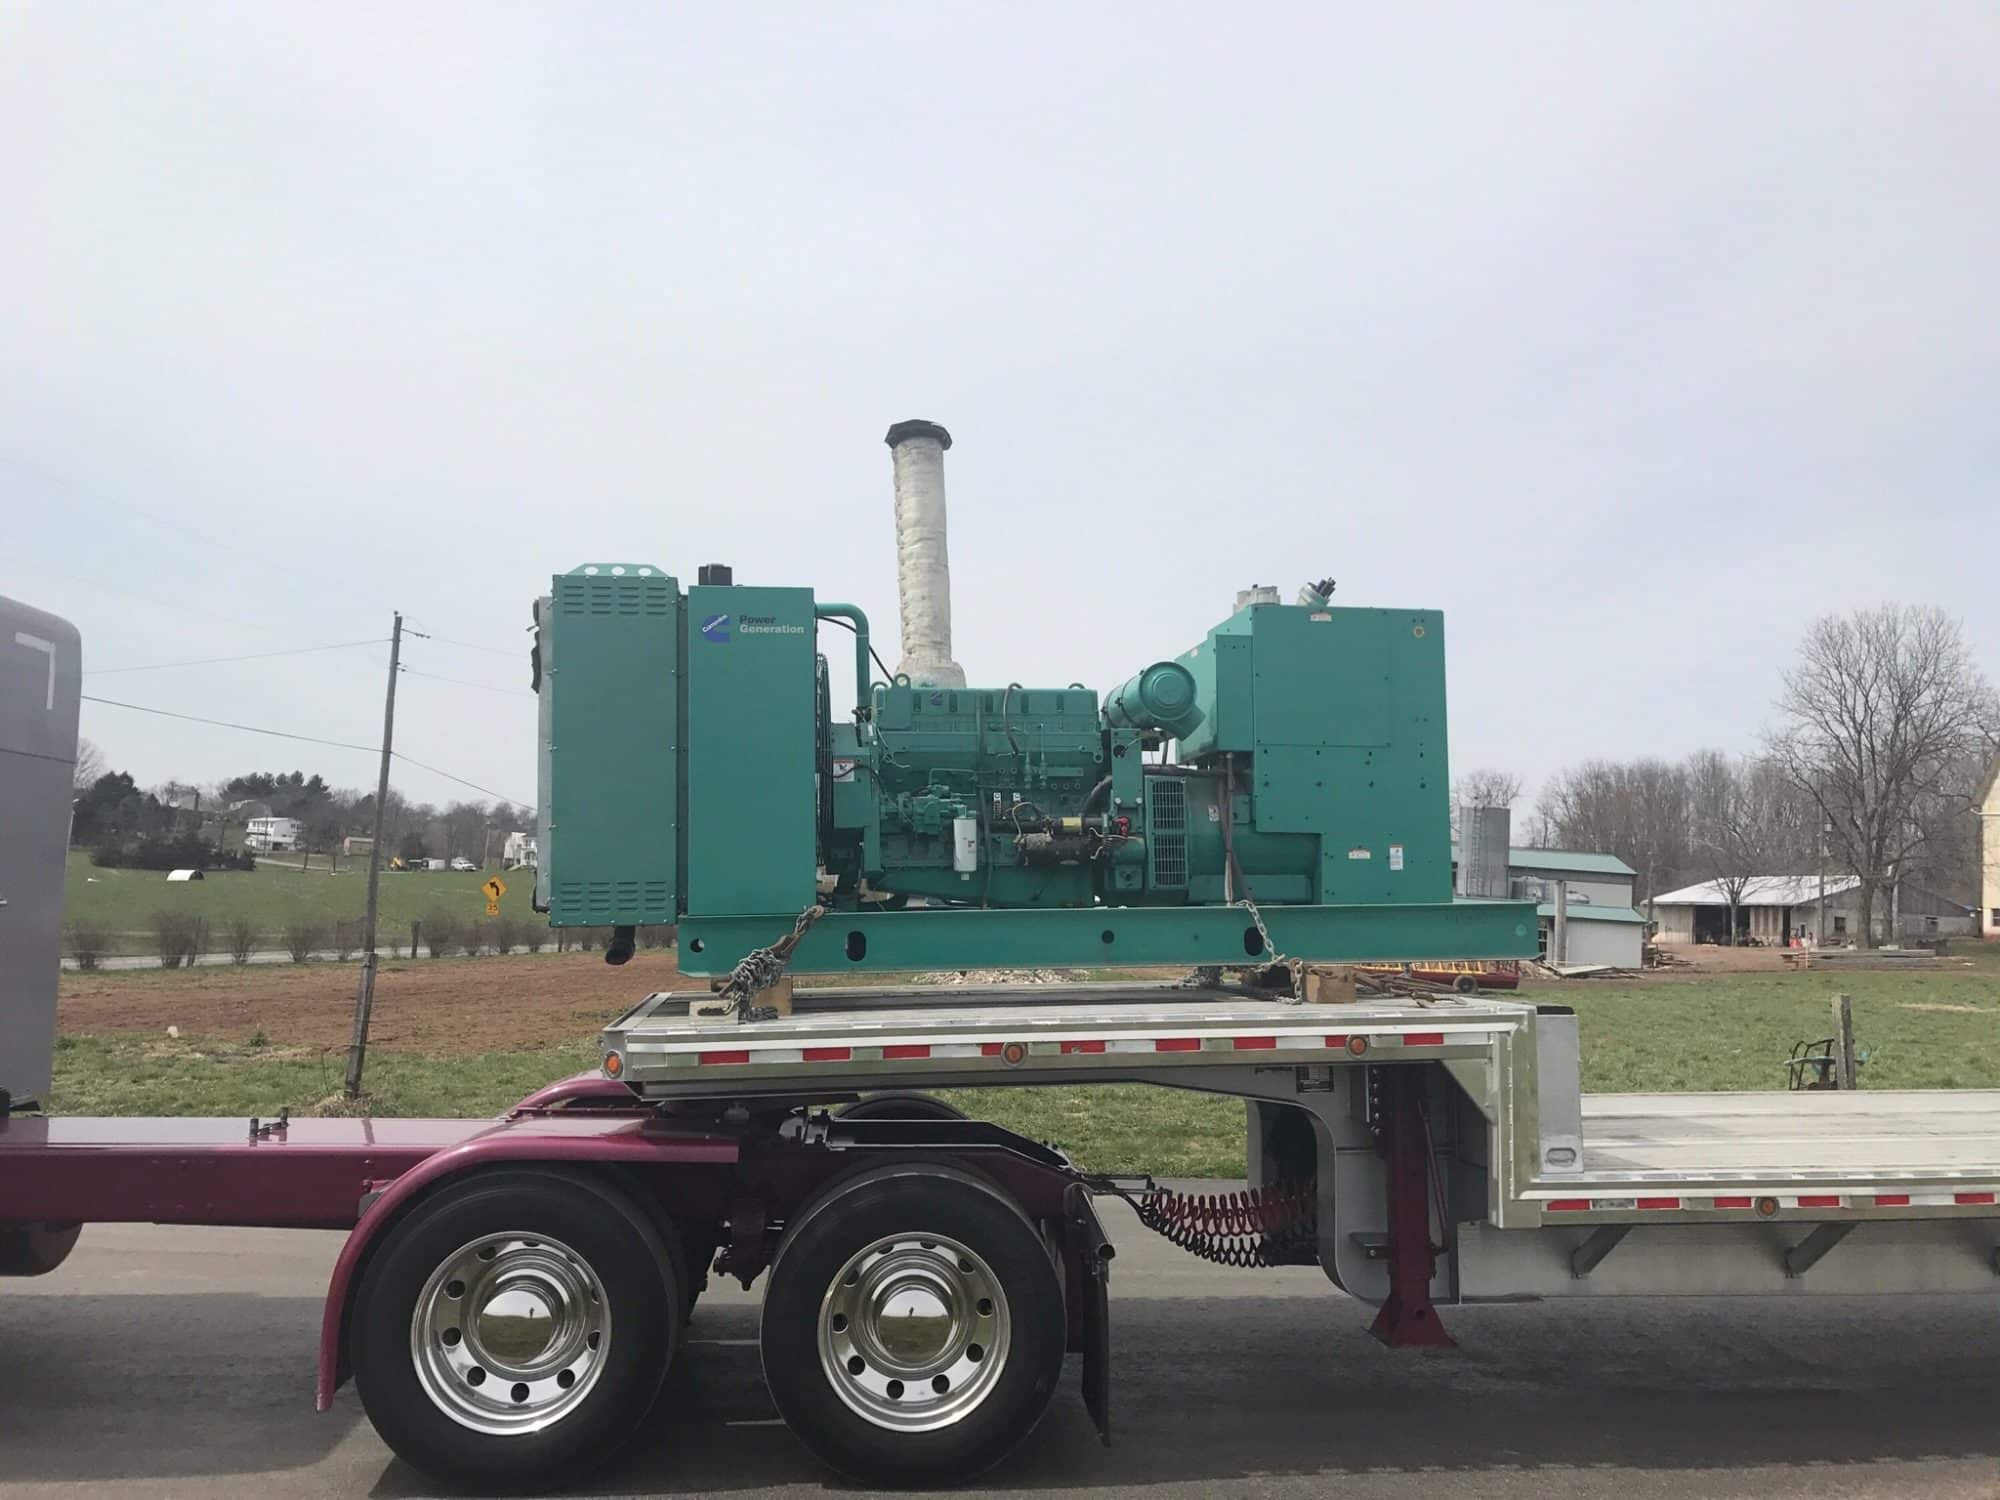 looking for generators for sale